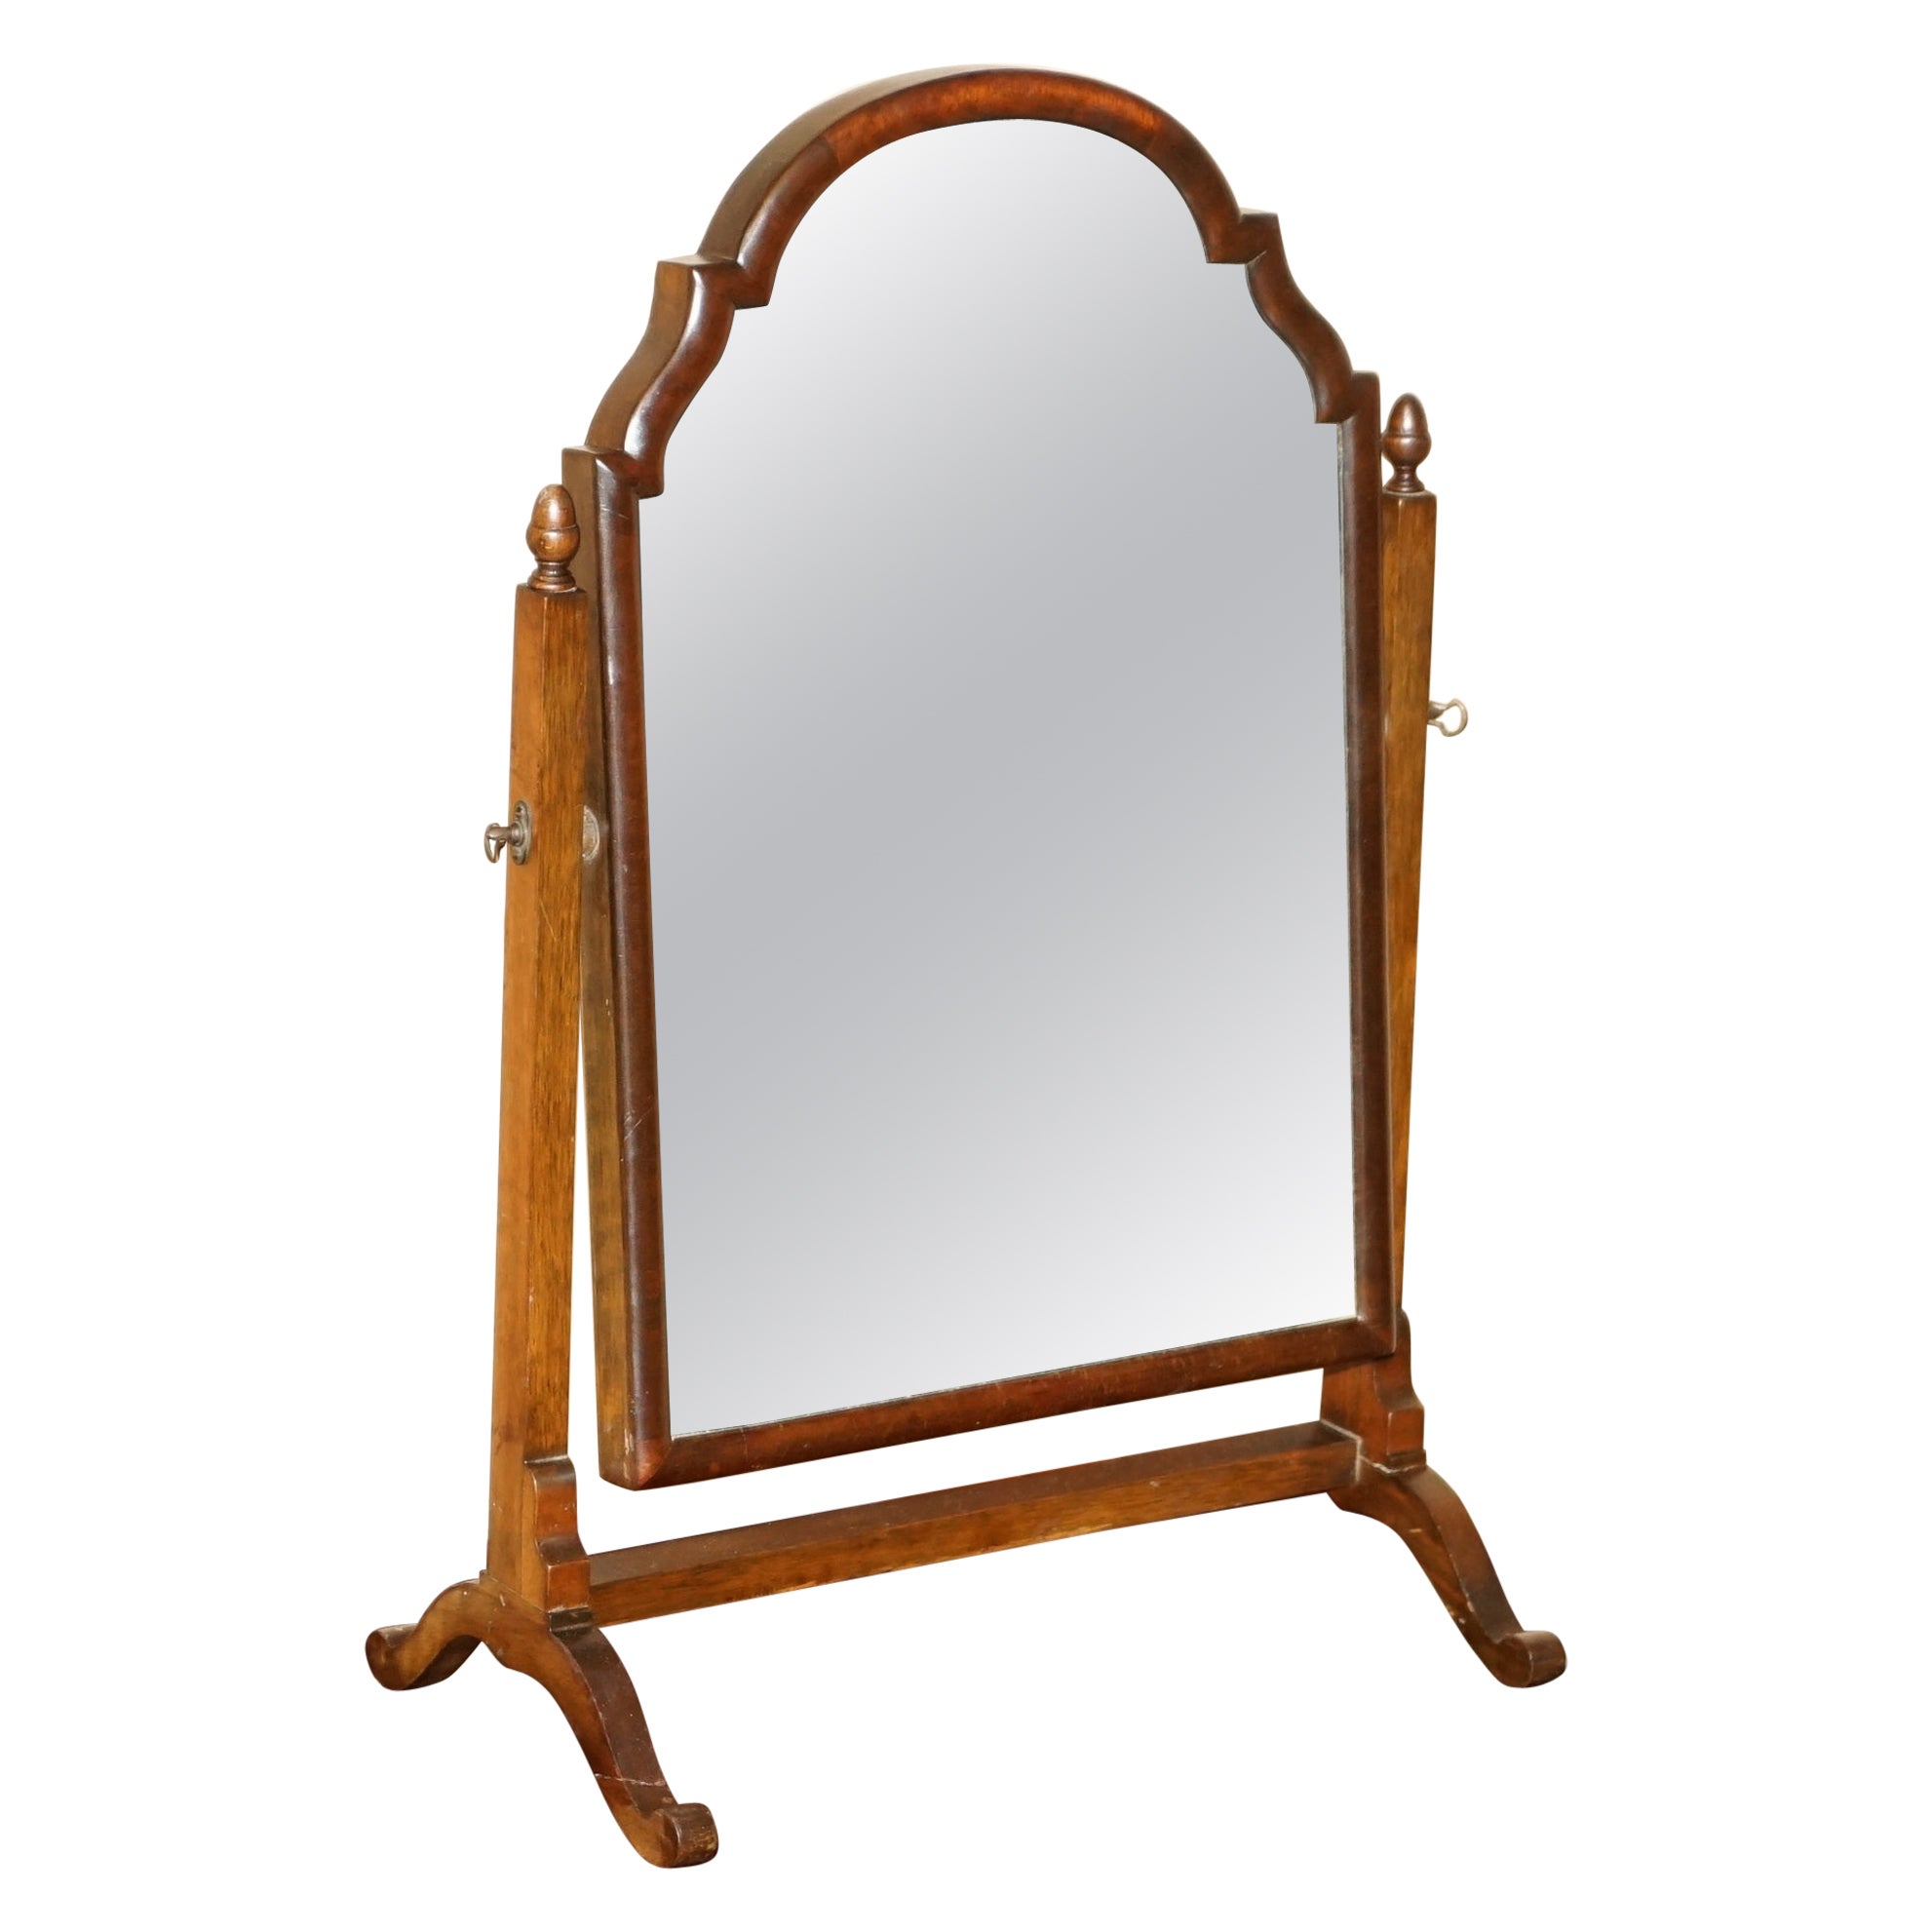 ANTIQUE ViCTORIAN TABLE TOP CHEVAL MIRROR FOR DRESSING TABLES AND DISPLAY For Sale